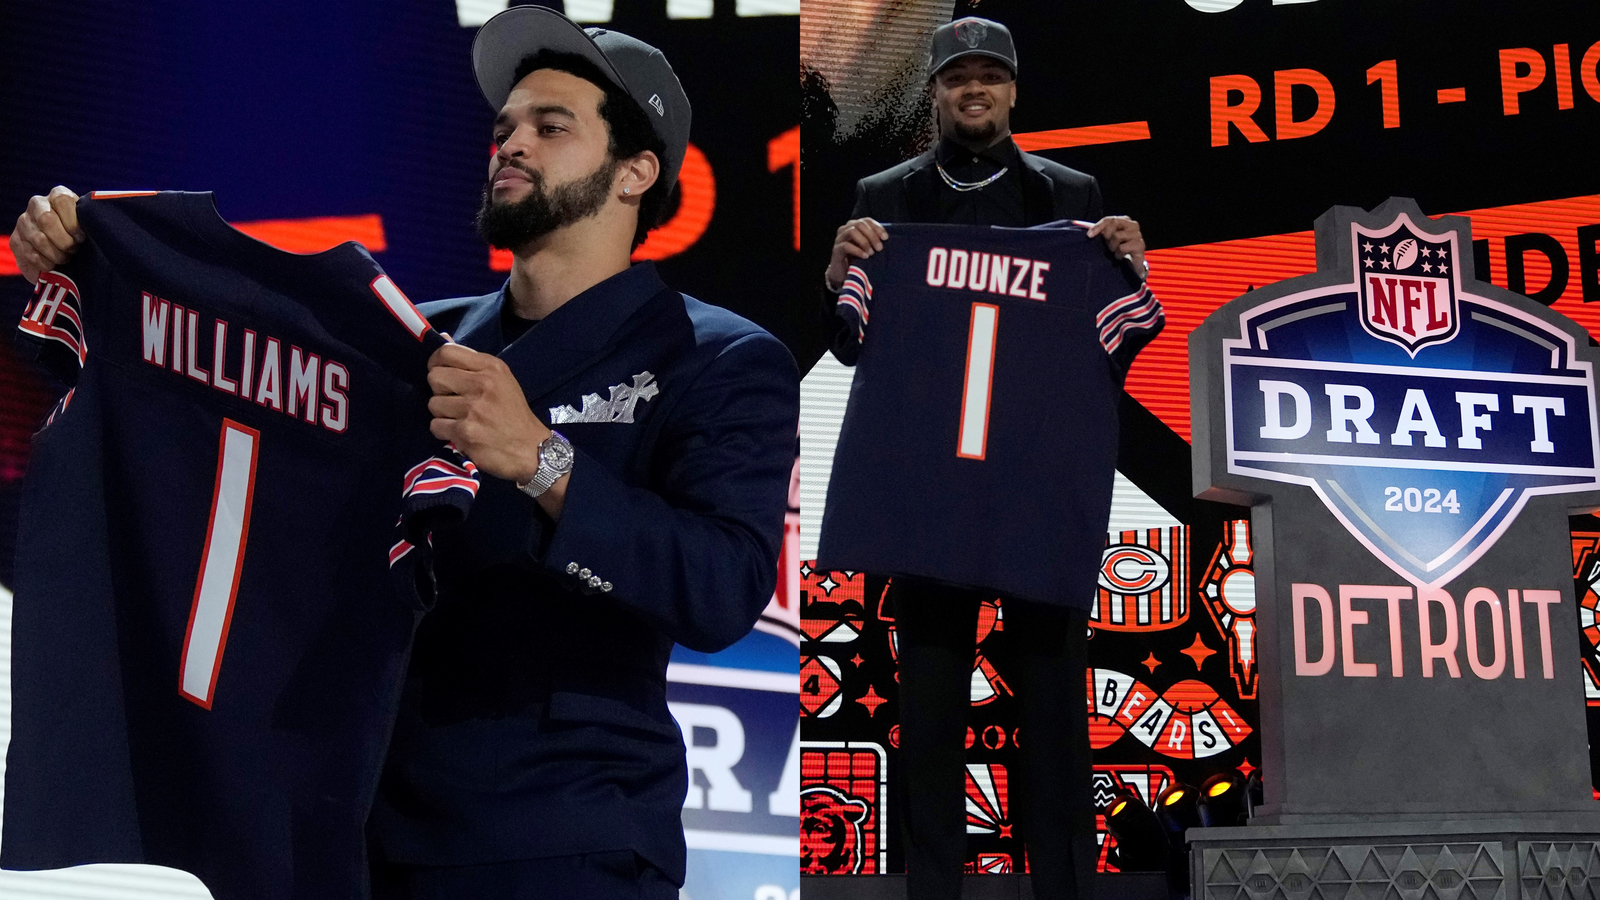 2024 NFL Draft: Chicago Bears select QB Caleb Williams with No. 1 overall pick in 1st round; Bears take Rome Odunze with 9th pick